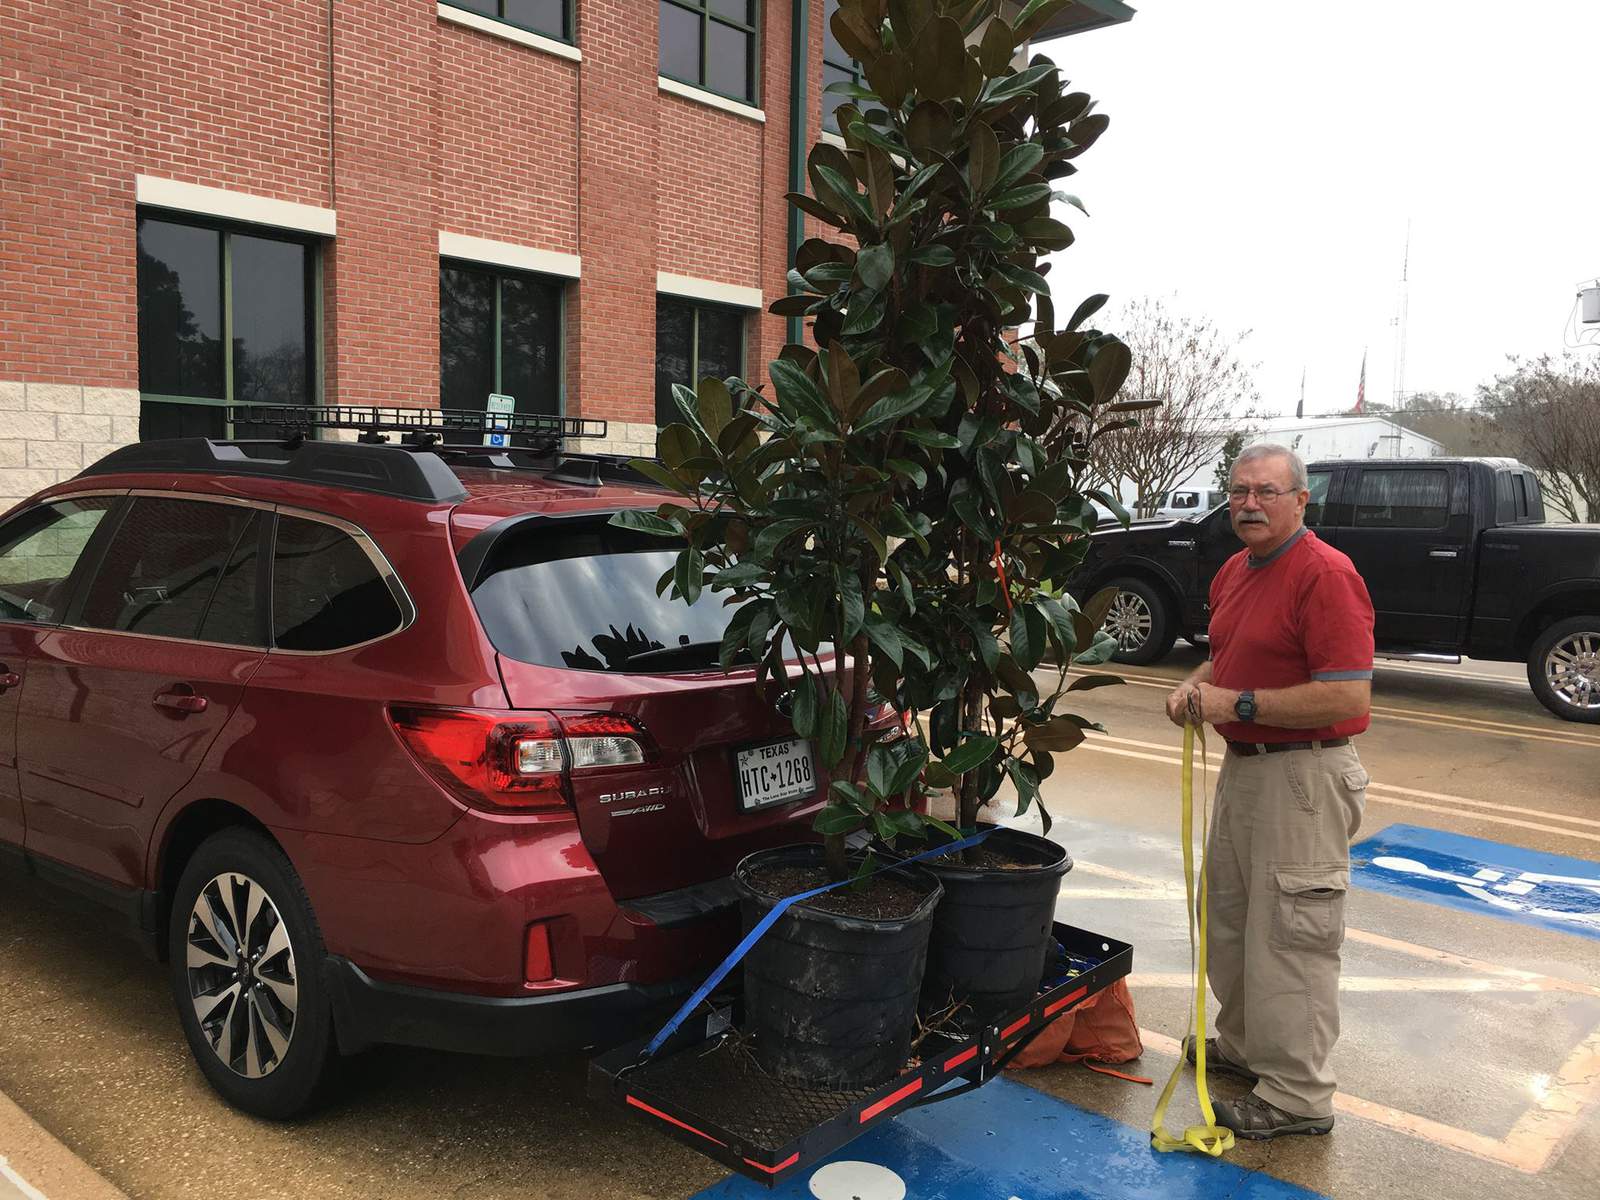 You can get free trees from the City of Friendswood in January